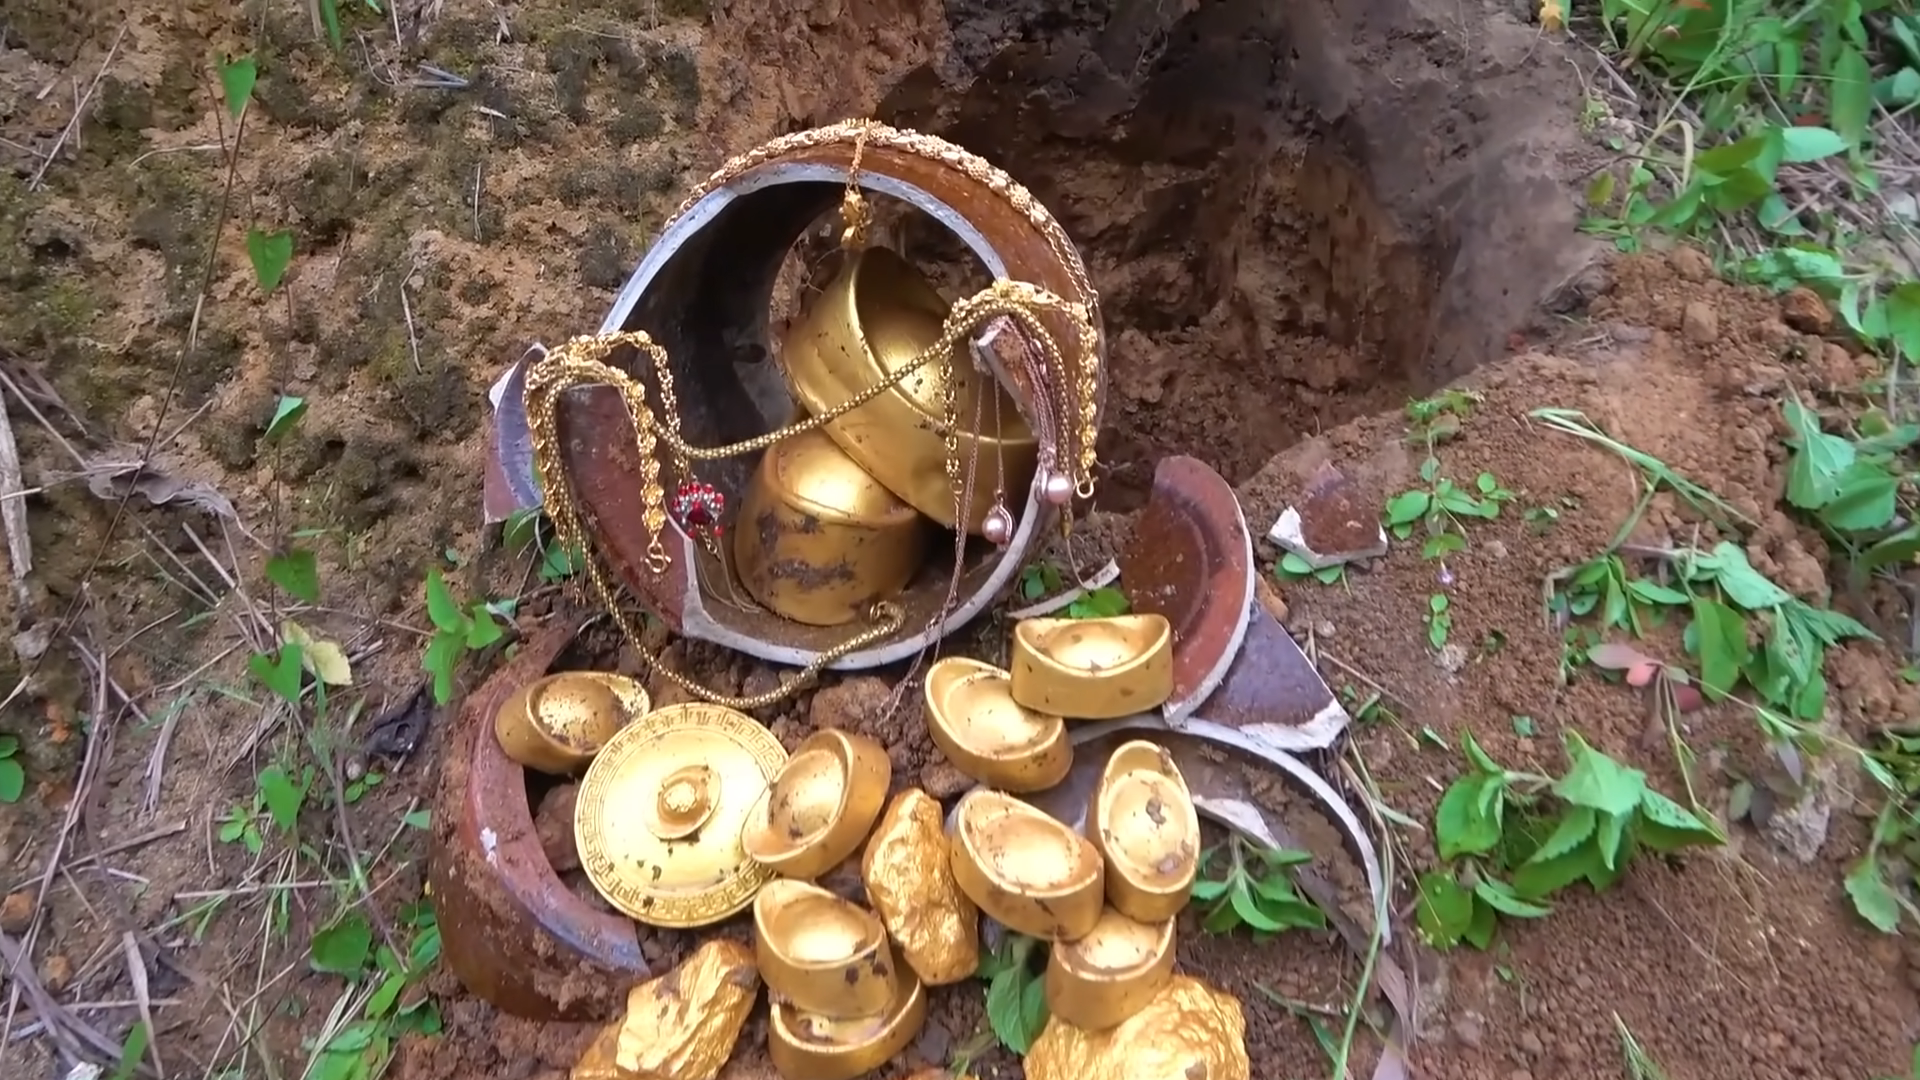 I used the detector to search for treasures and found a jar of gold ingots and gold jewelry jars